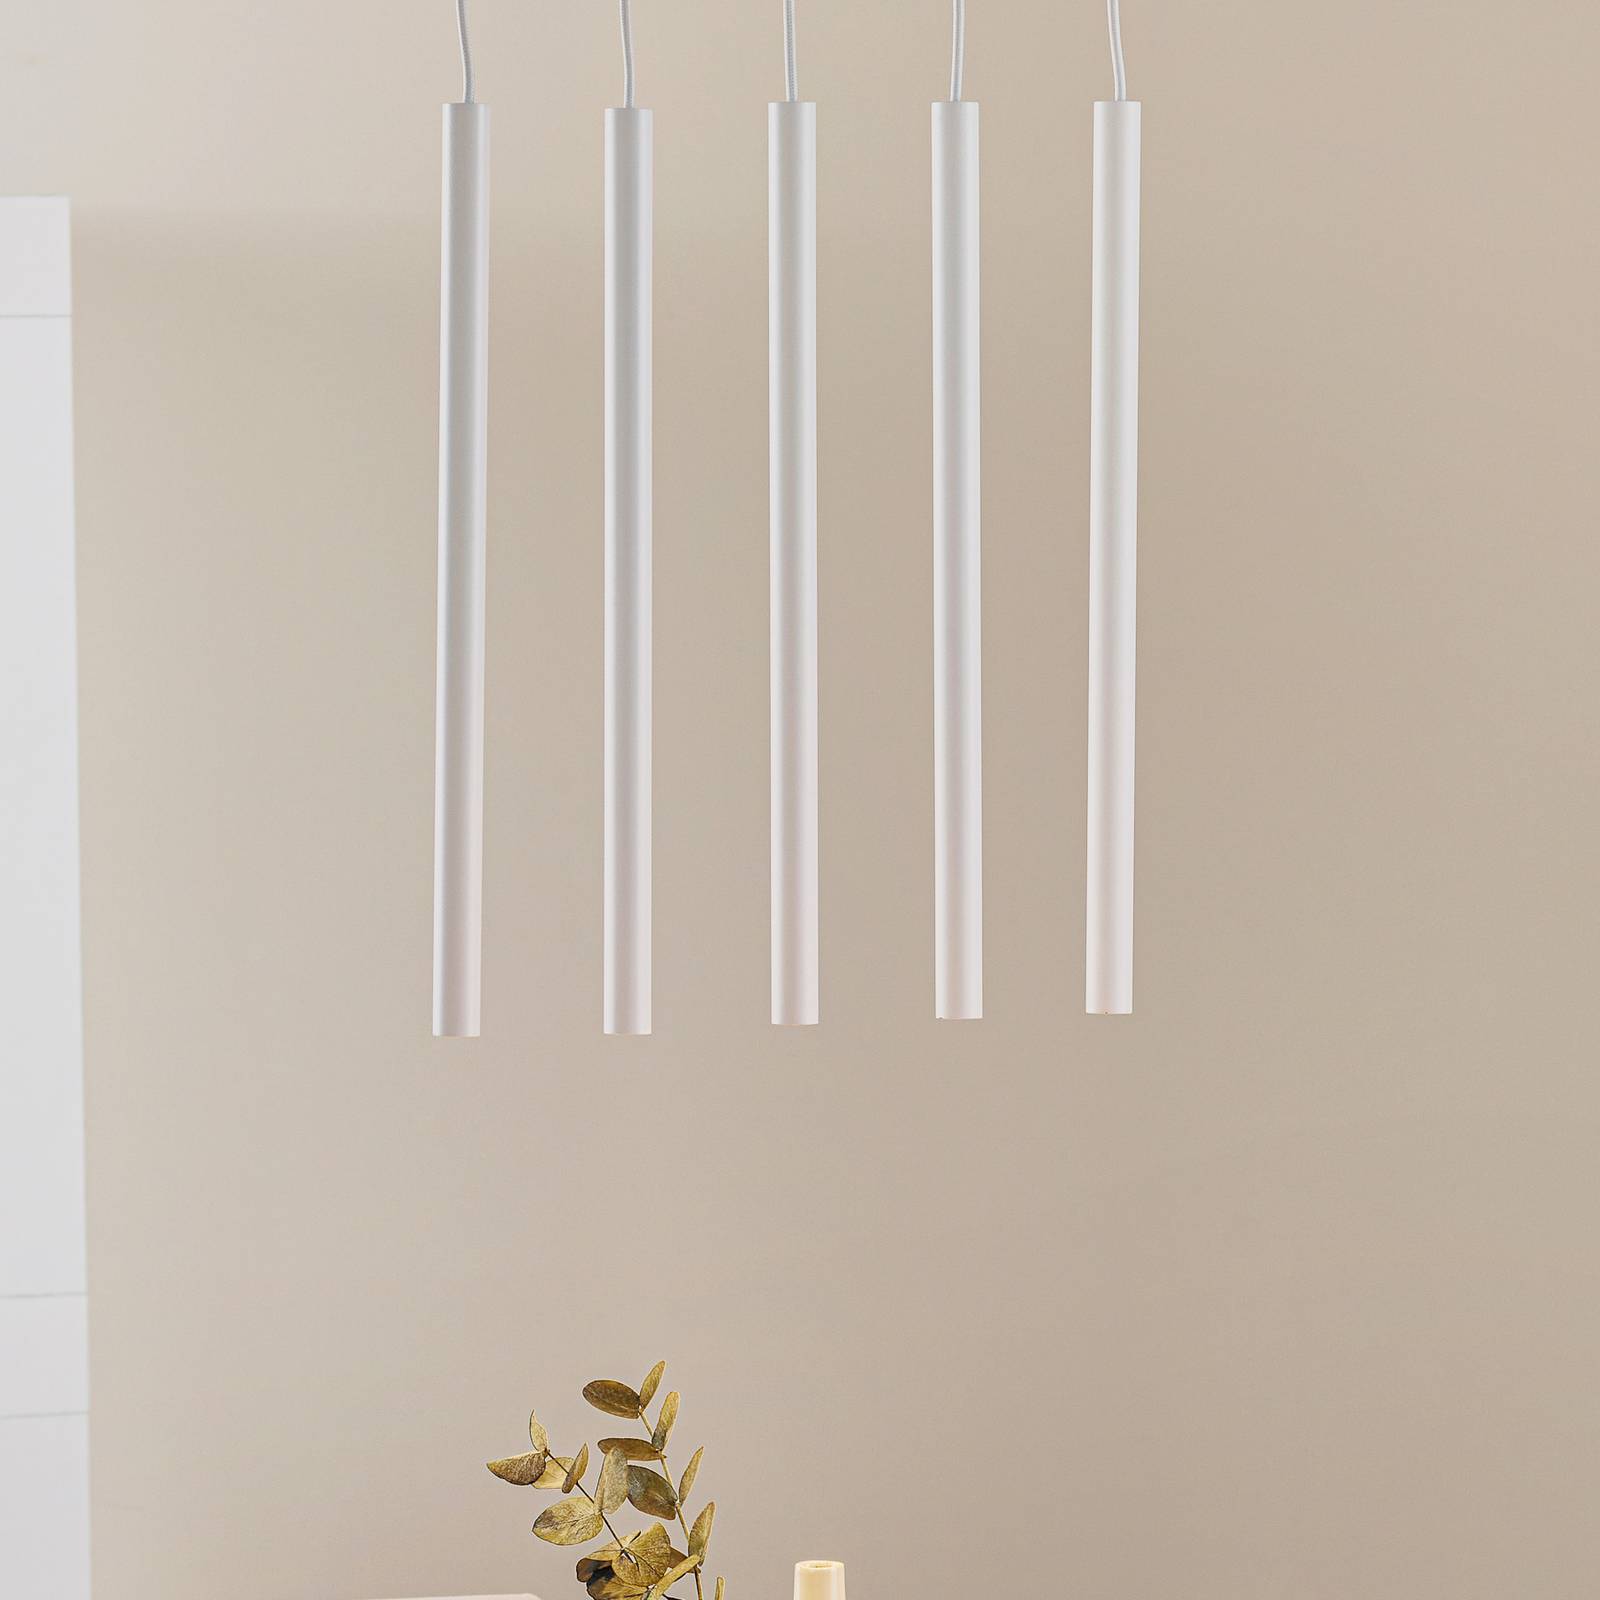 Image of Euluna Suspension Thin, blanc, à 5 lampes, Linear 5903282730458